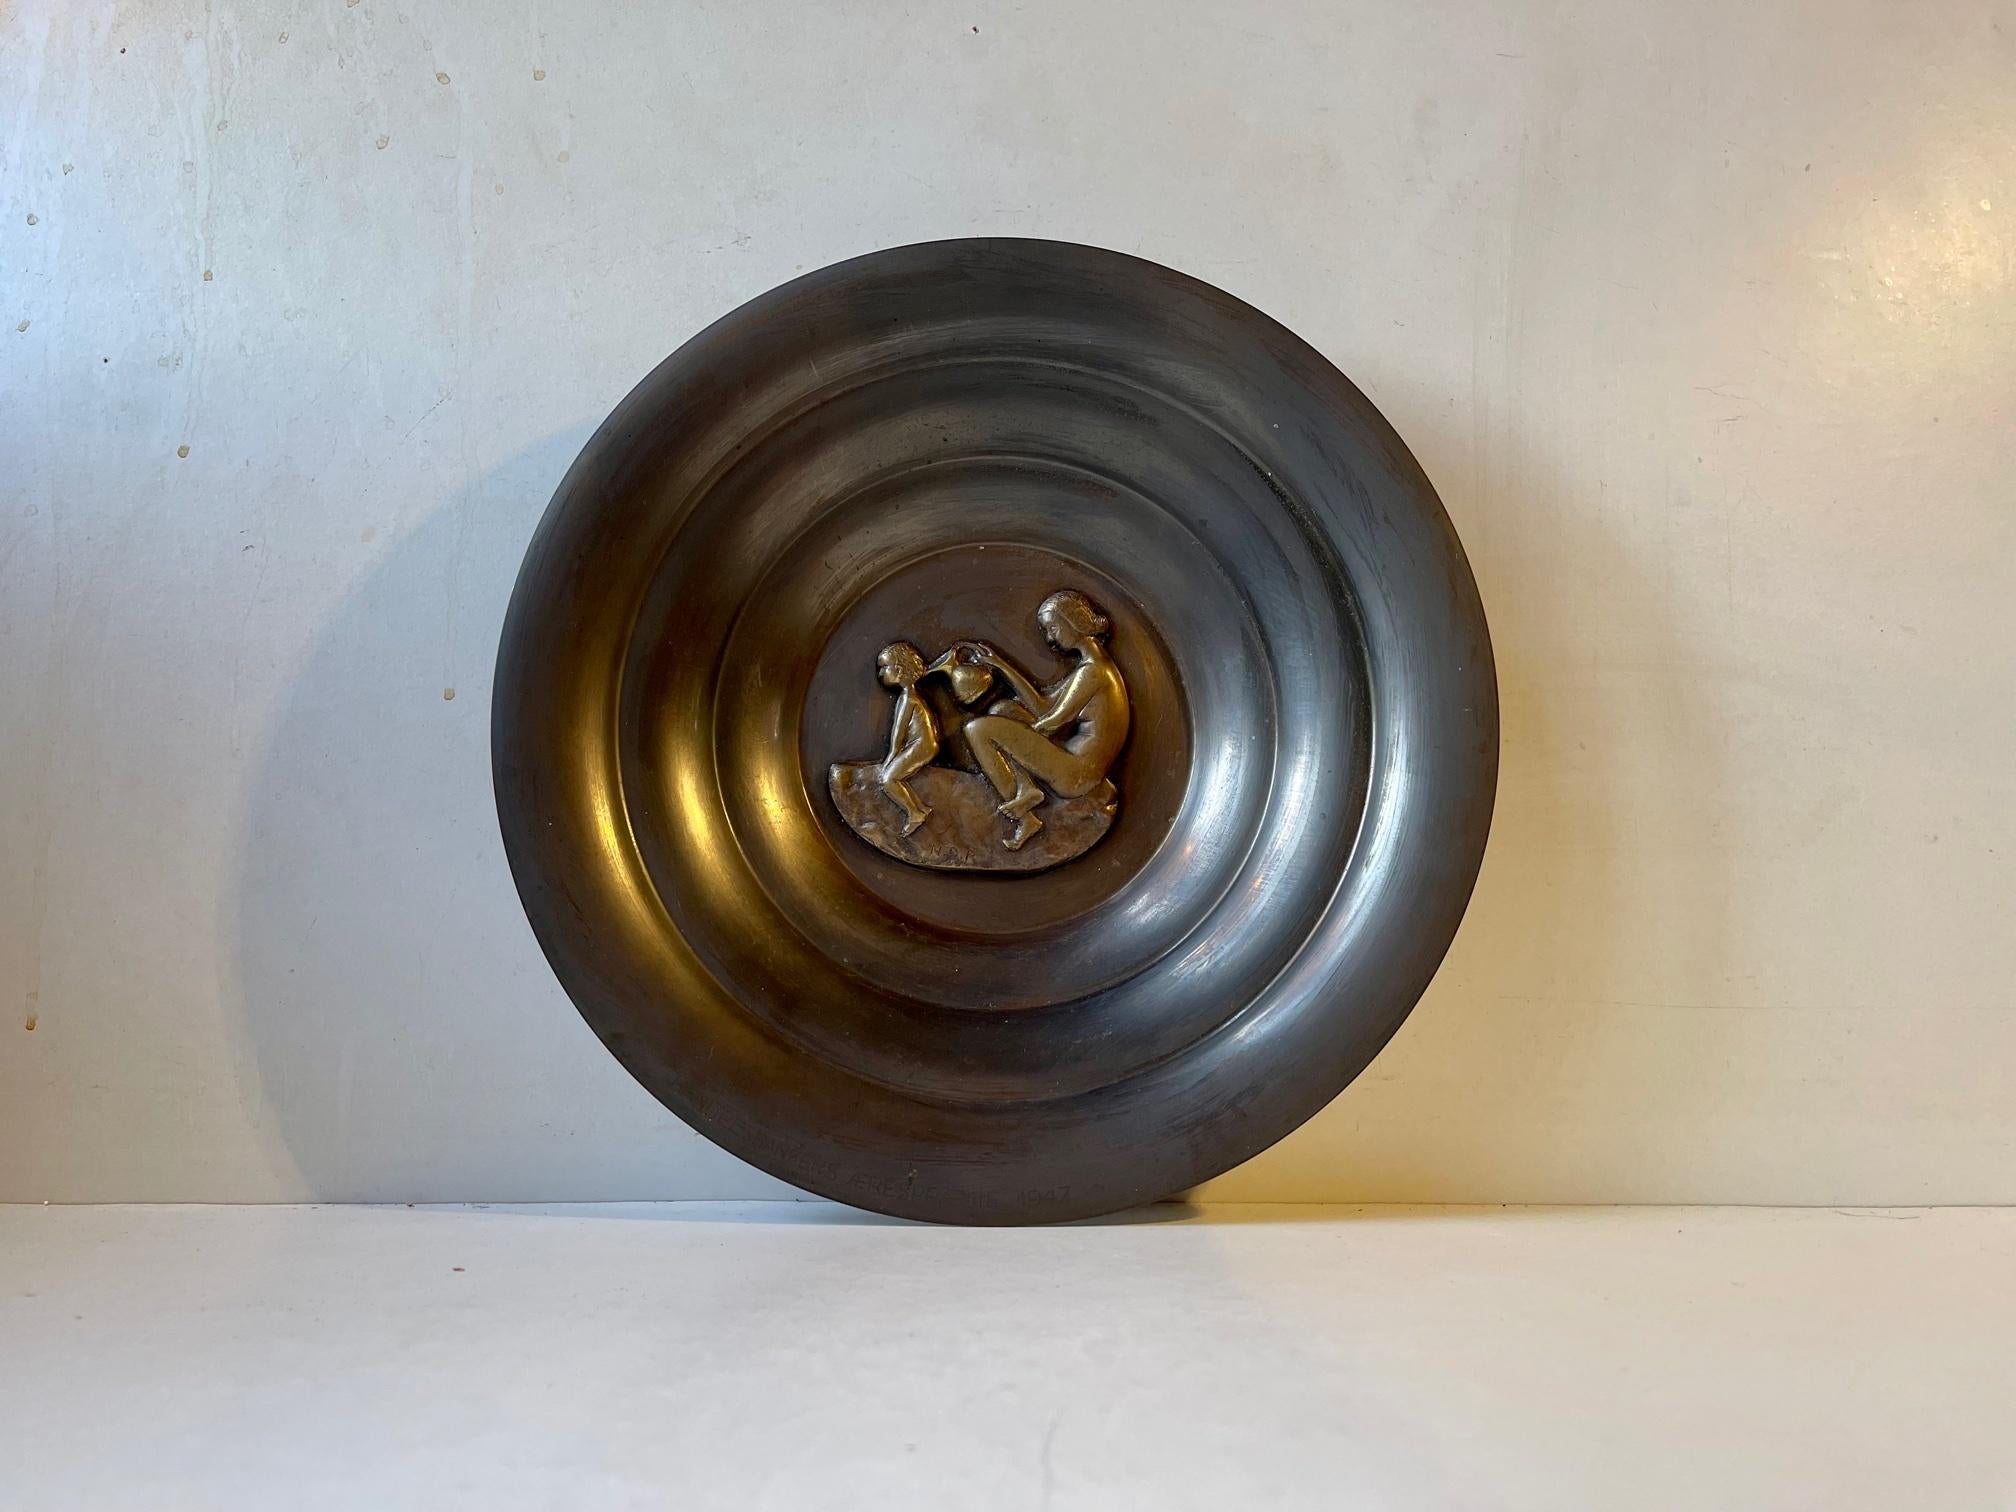 Large Art Deco patinated pewter bowl with a center intimate motif of a mother bathing her child. It is designed by danish N. Dam Ravn and manufactured by Nordisk Malm in Denmark during the 1930s or 40s. The same period Just Andersen took the world